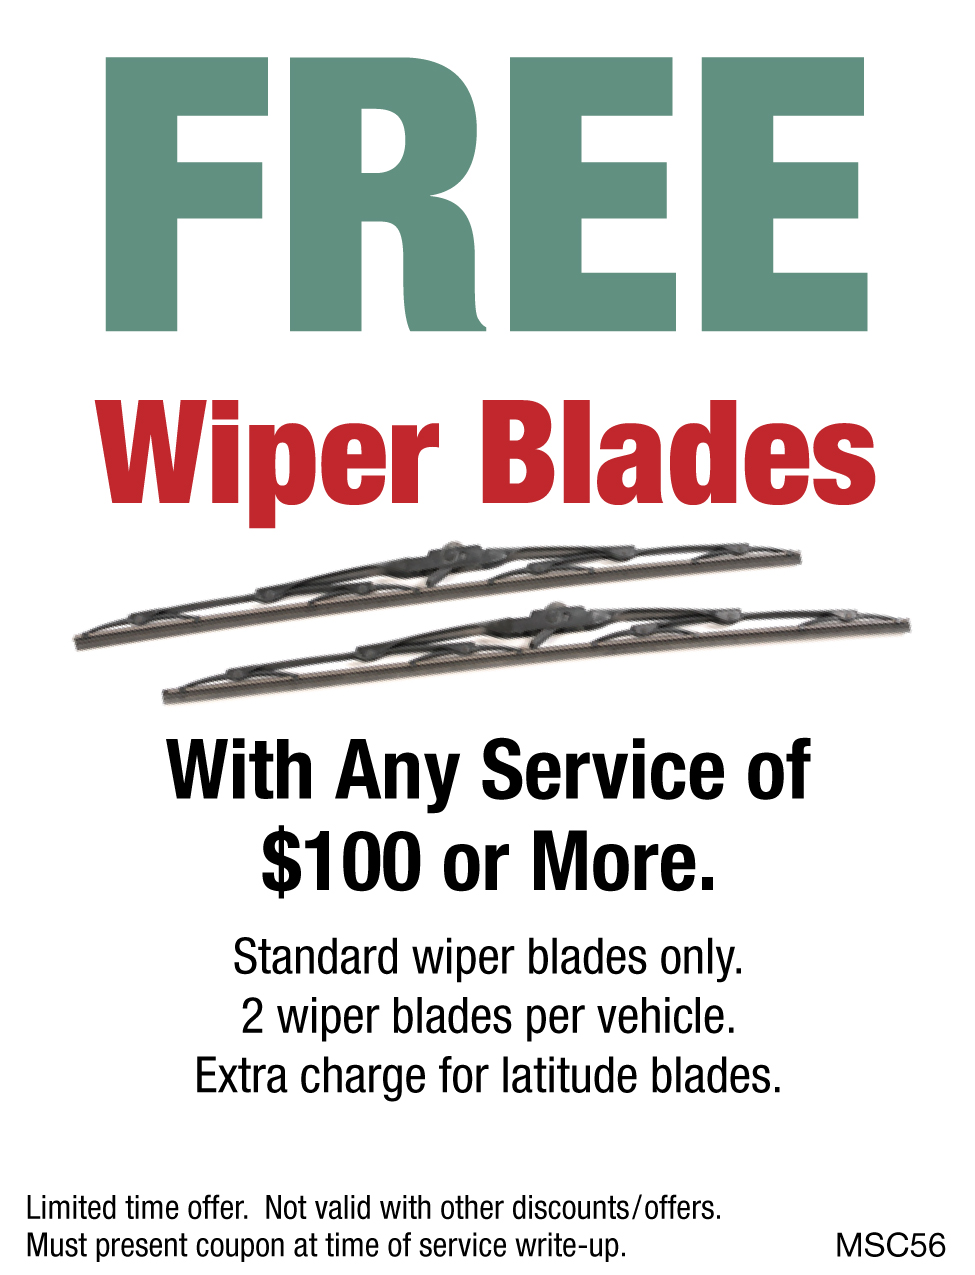 FREE Wiper Blades W/Any Service $100 or More